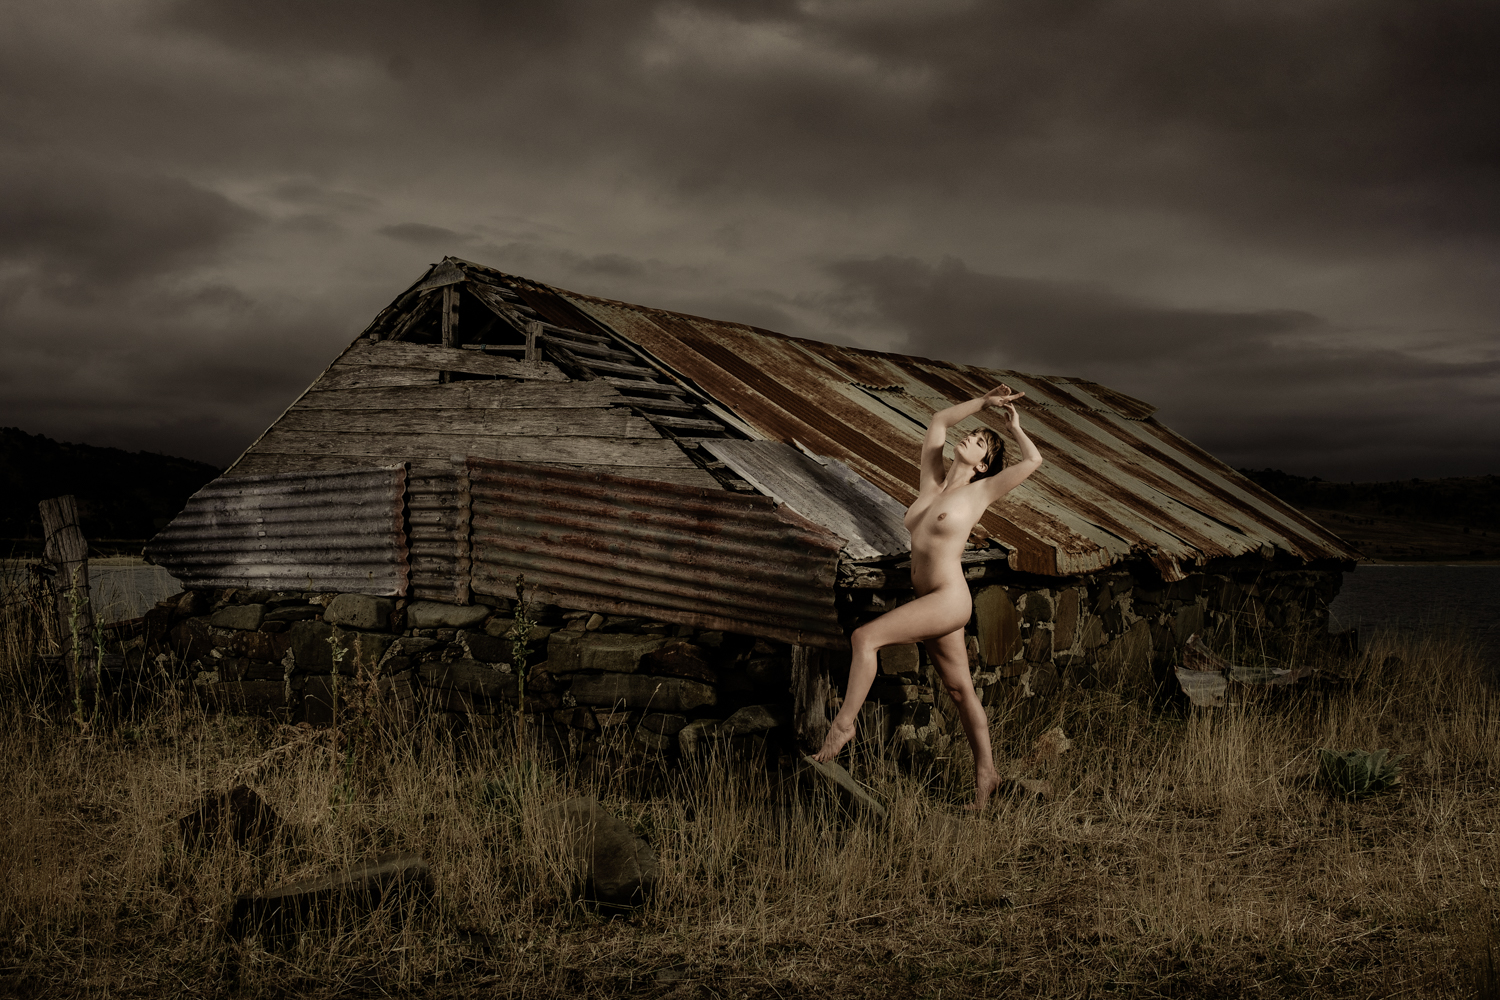 Another one from my Tassie workshop. This is the amazing @skdmodel from the UK who happens to be heading to Brisbane very soon. I scouted this location way back in 2007 on my very first trip to Tasmania and it just happened to be 5 minutes up the road from our accommodation for the workshop. Lighting with two @elinchrom_ltd ELB 400's to create some drama. Assisted by @phototim1999 and @theimagesguy